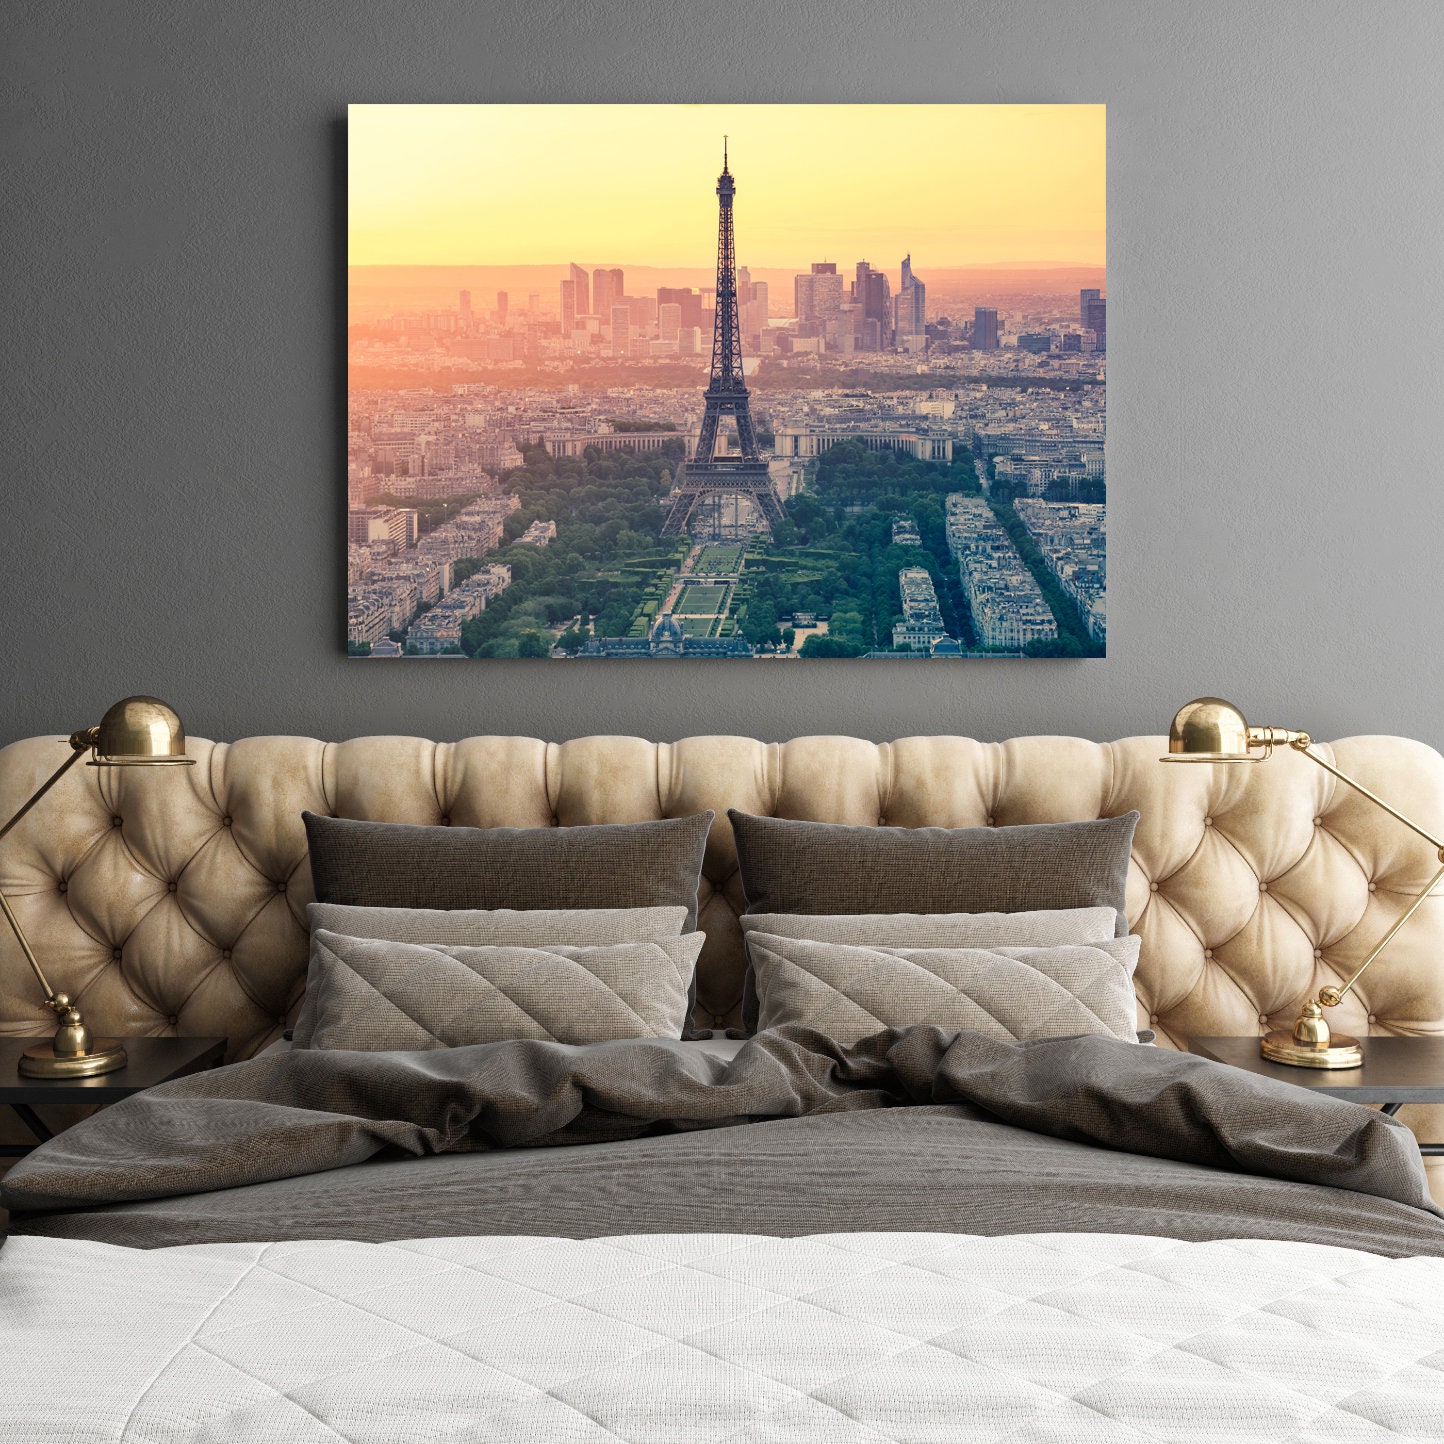 Eiffel Tower Awesome Decor for Interior Room Paris Cityscape | Etsy